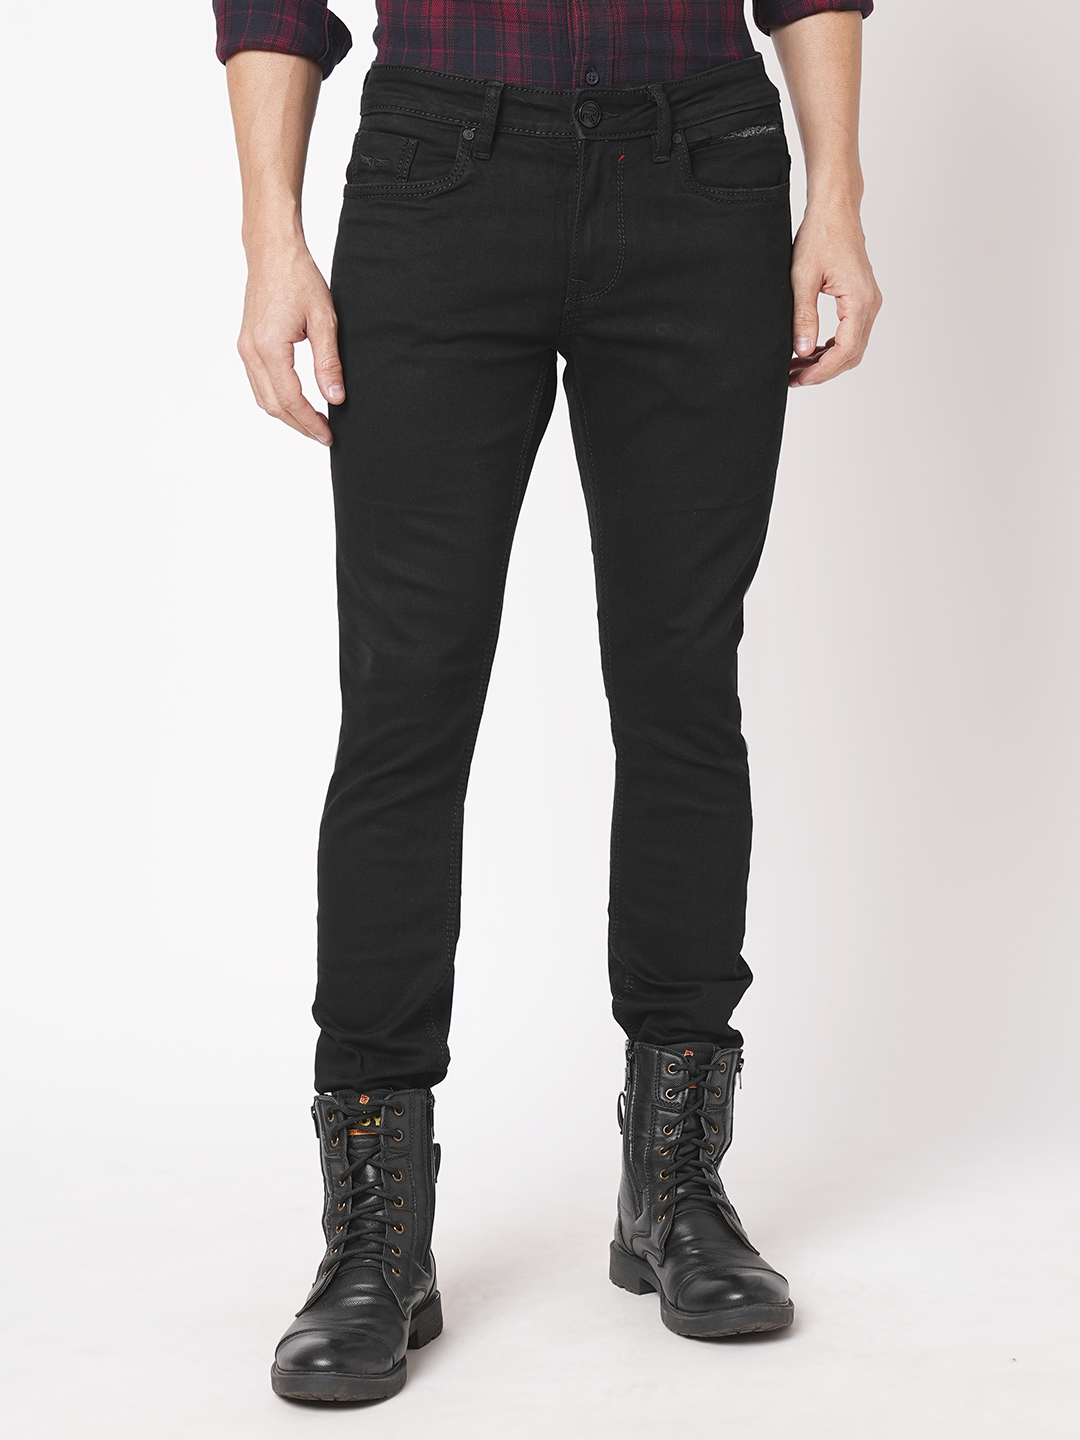 BLACK 5 POCKET MID-RISE NARROW TAPERED FIT JEANS (BILLY FIT)